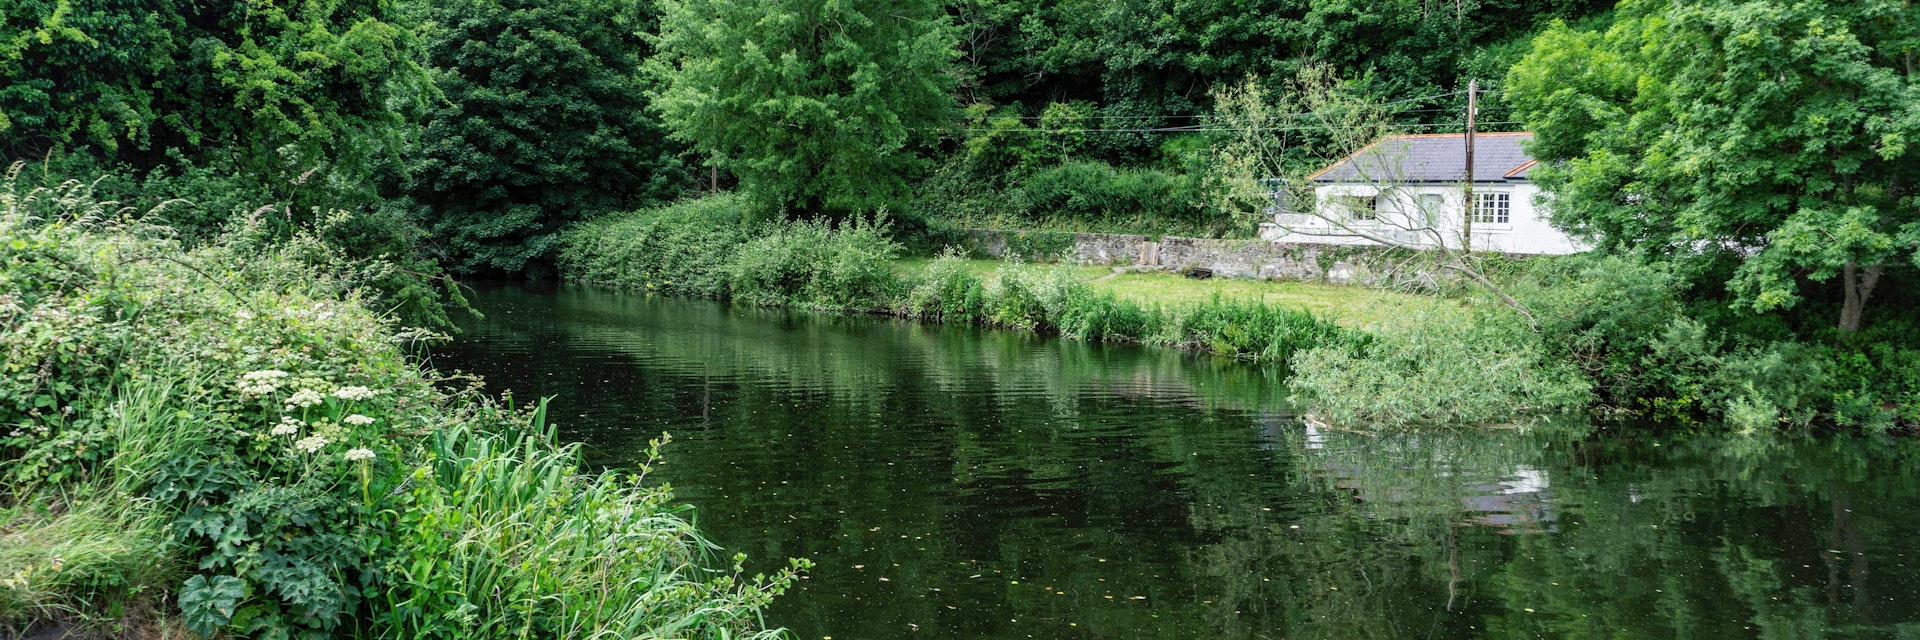 The River Liffey as it flows through the Strawberry Beds area of Chapelizod, Dublin, Ireland.